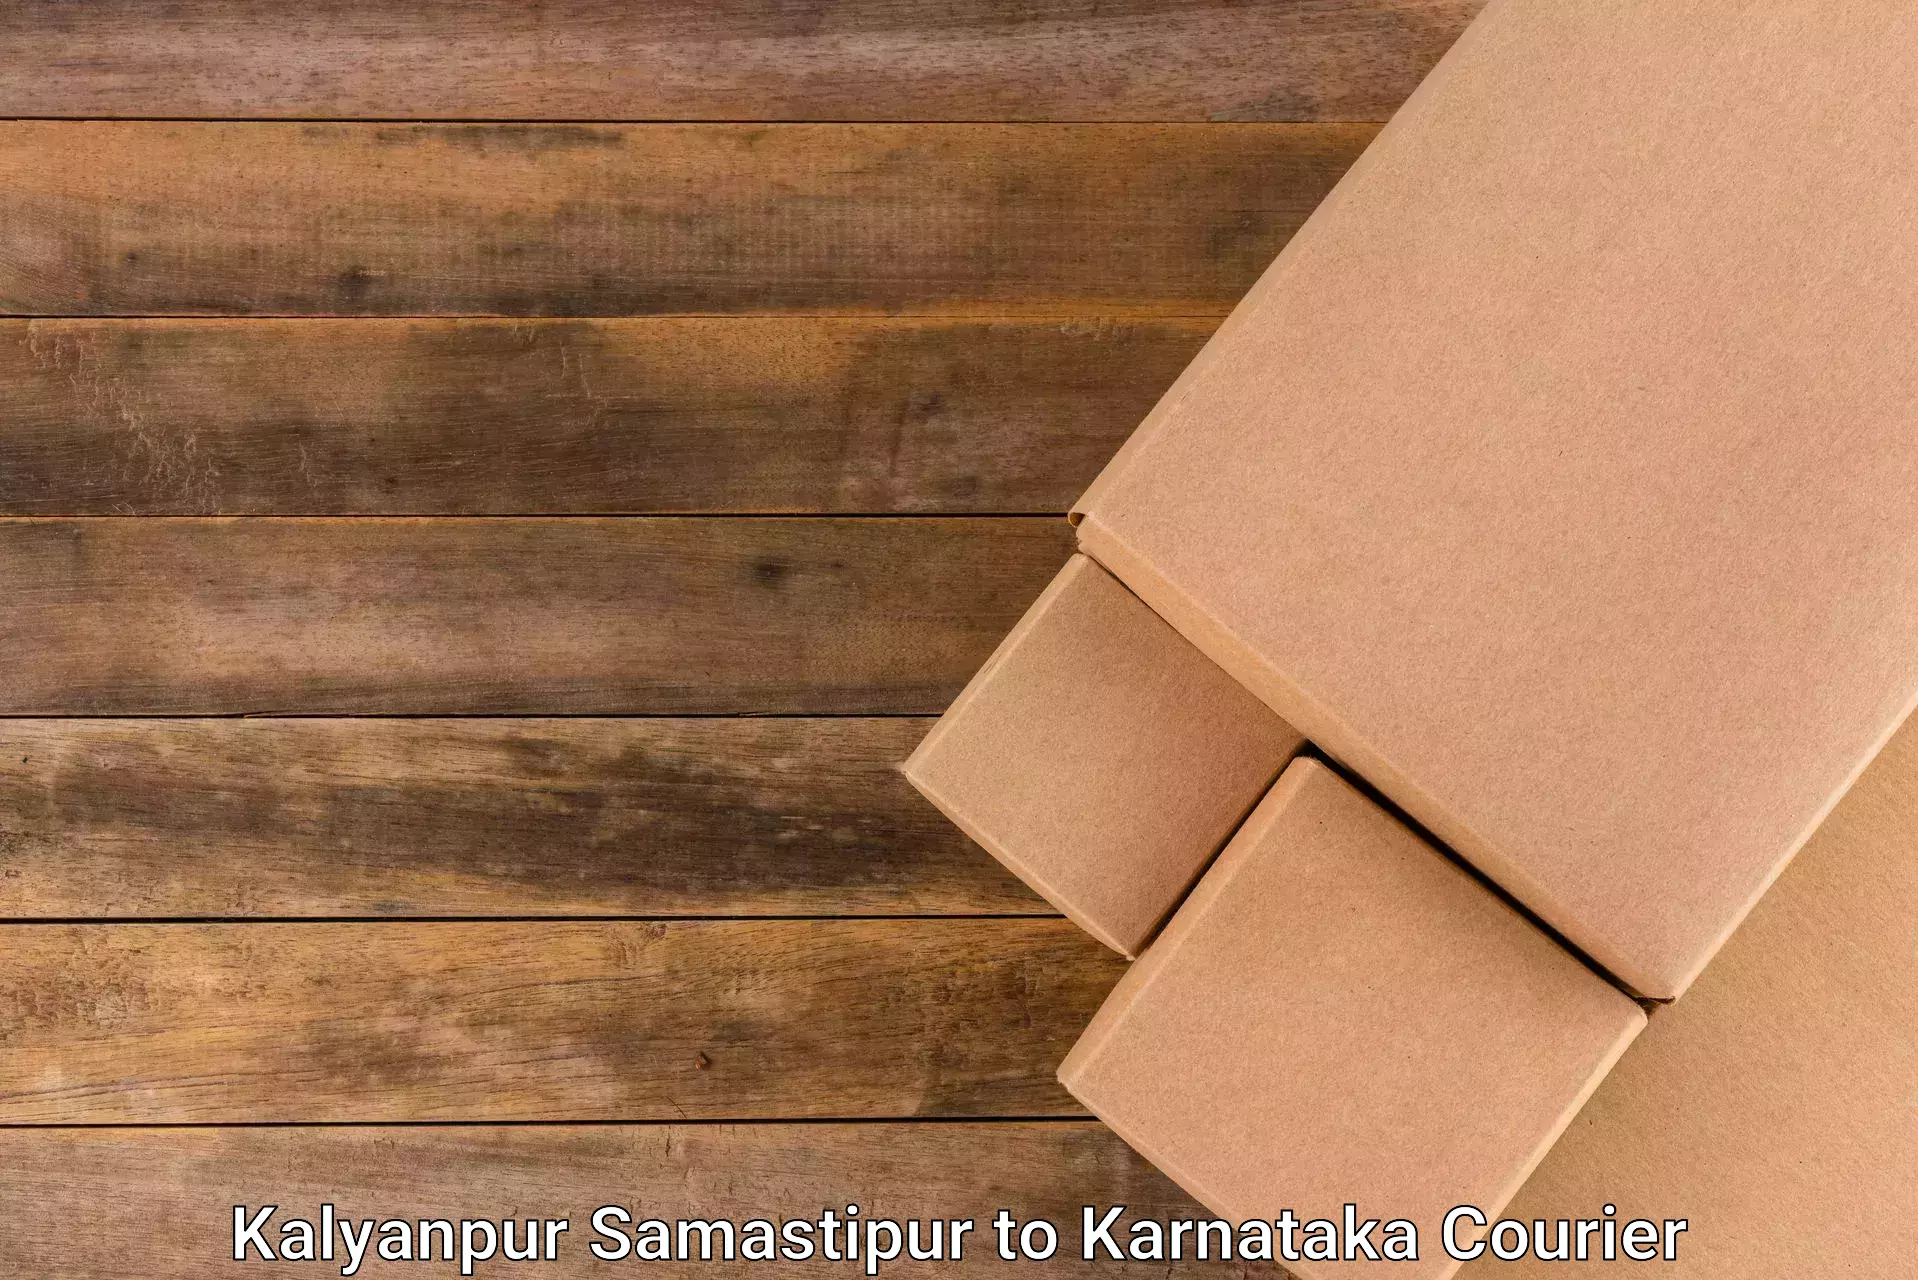 User-friendly courier app in Kalyanpur Samastipur to Hassan